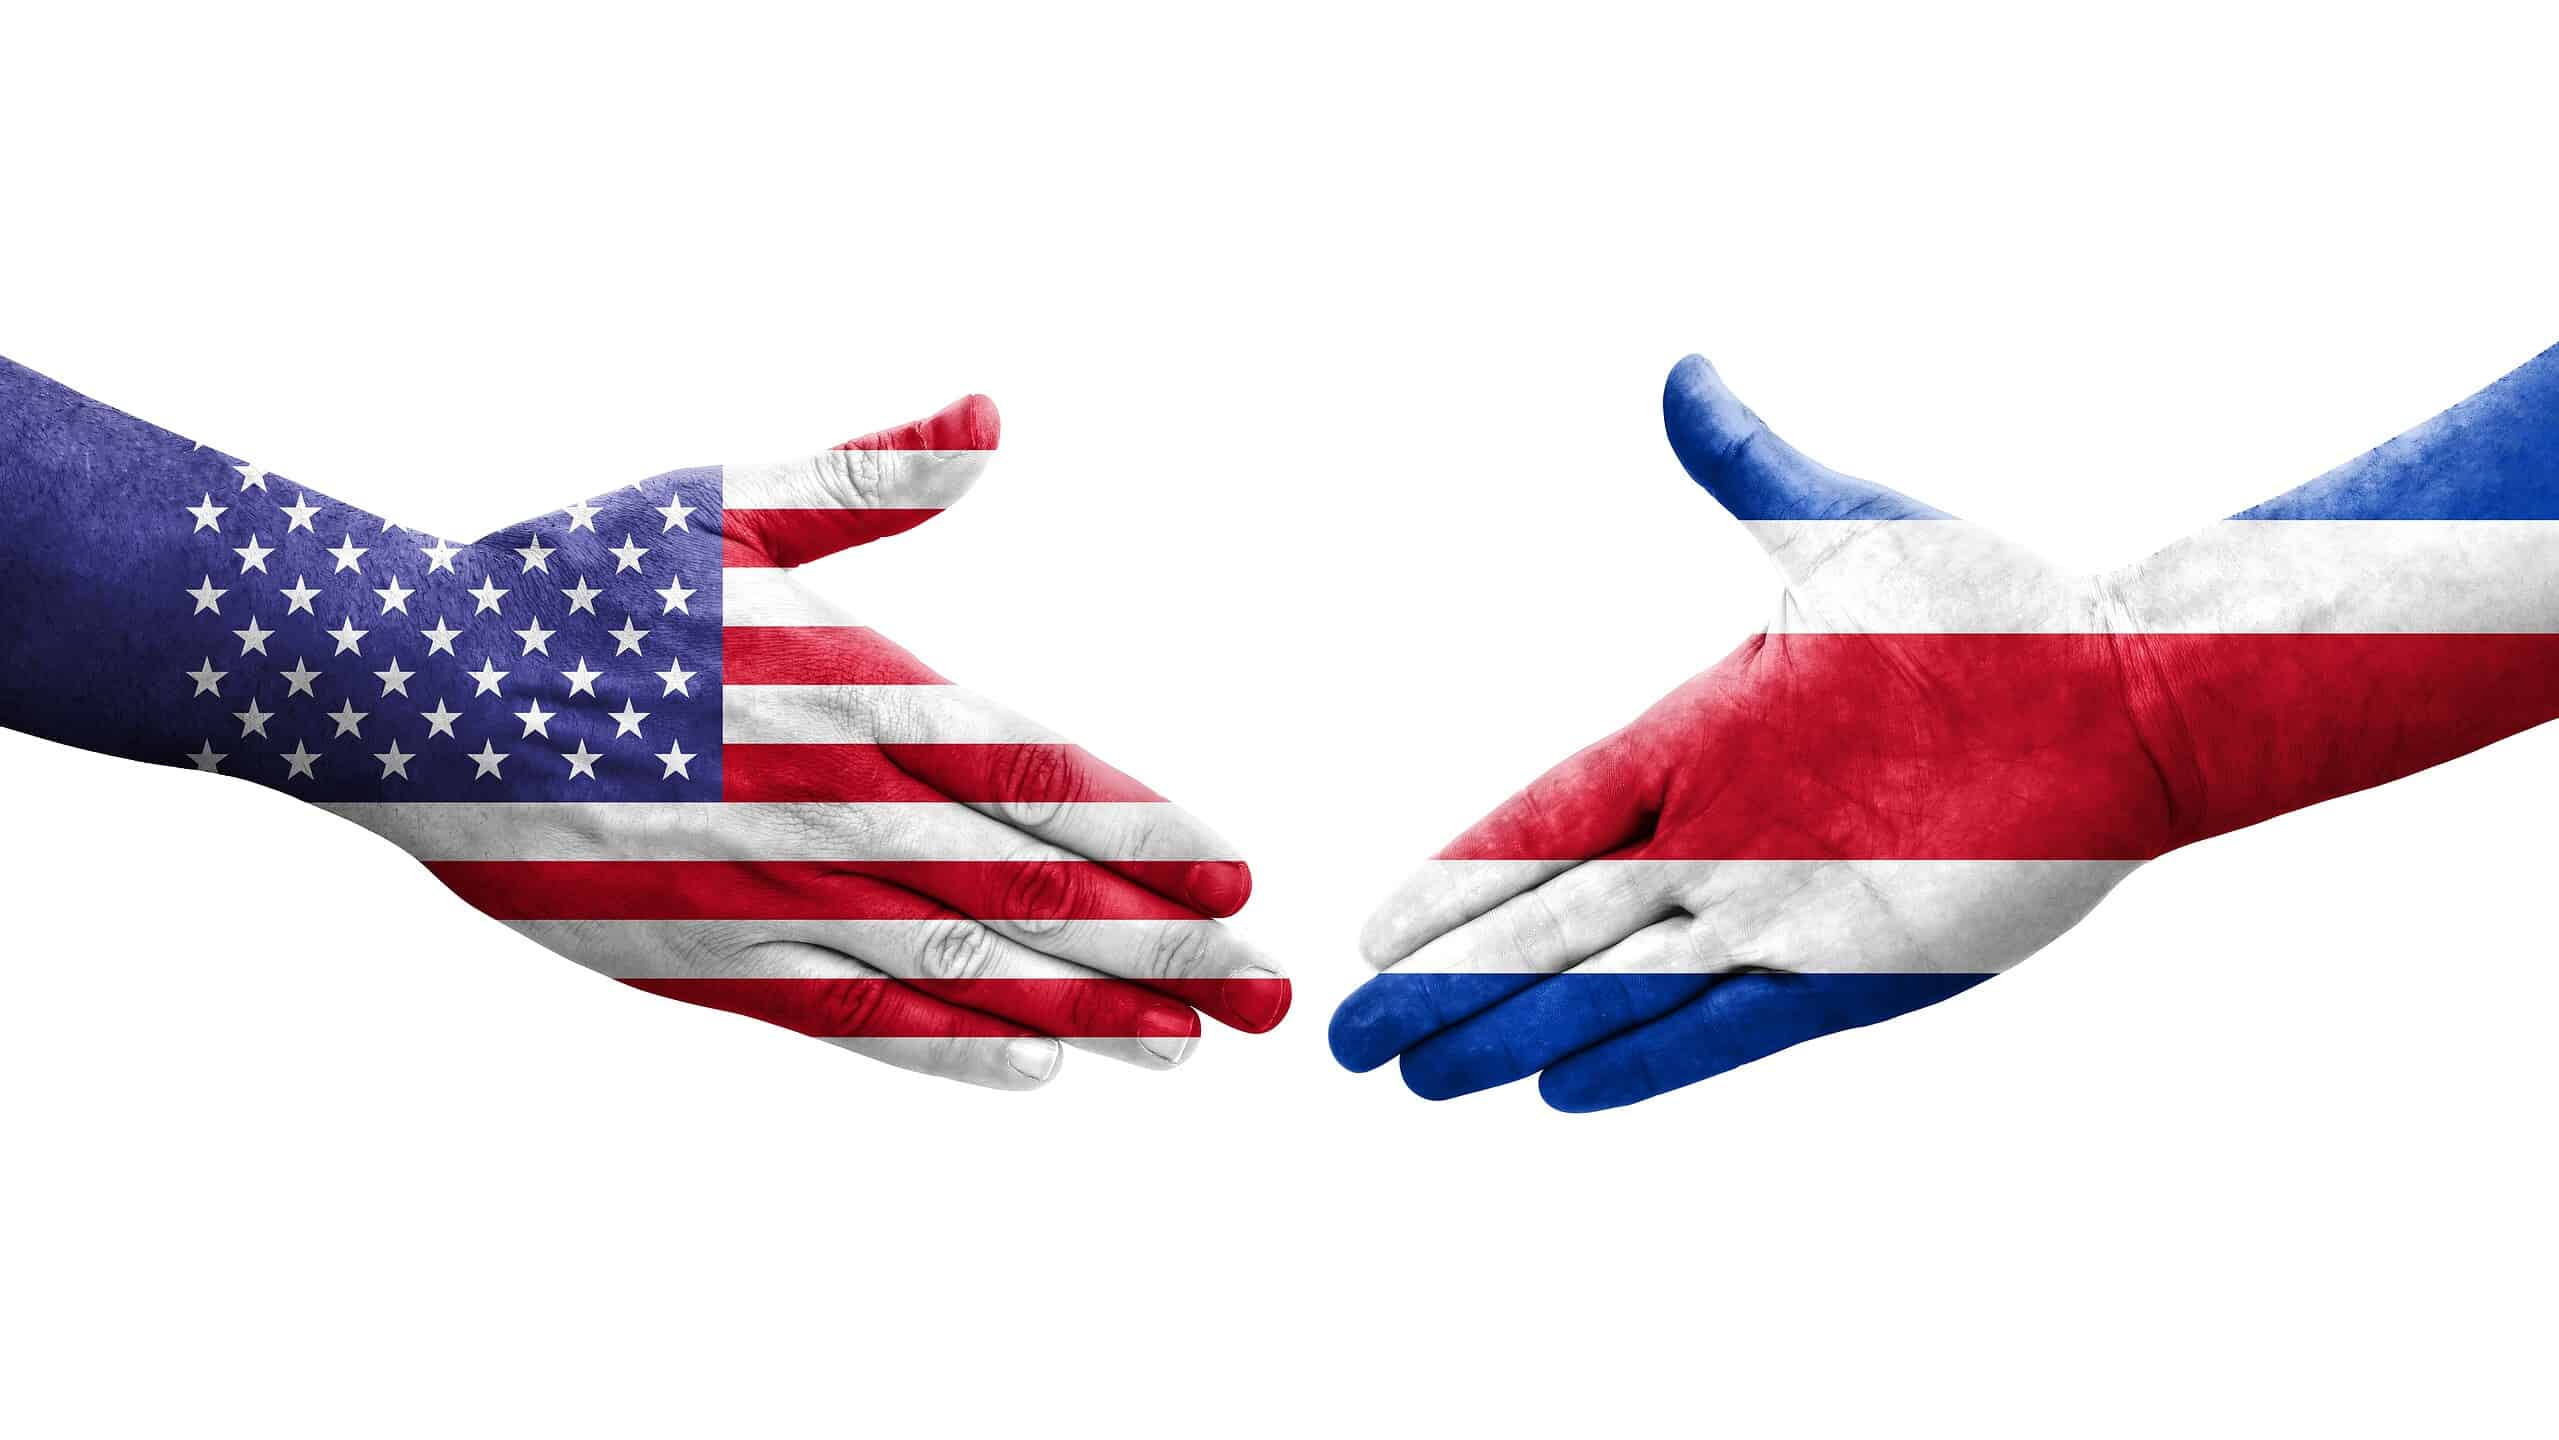 While Costa Rica isn't a US territory, the two countries have a strong alliance